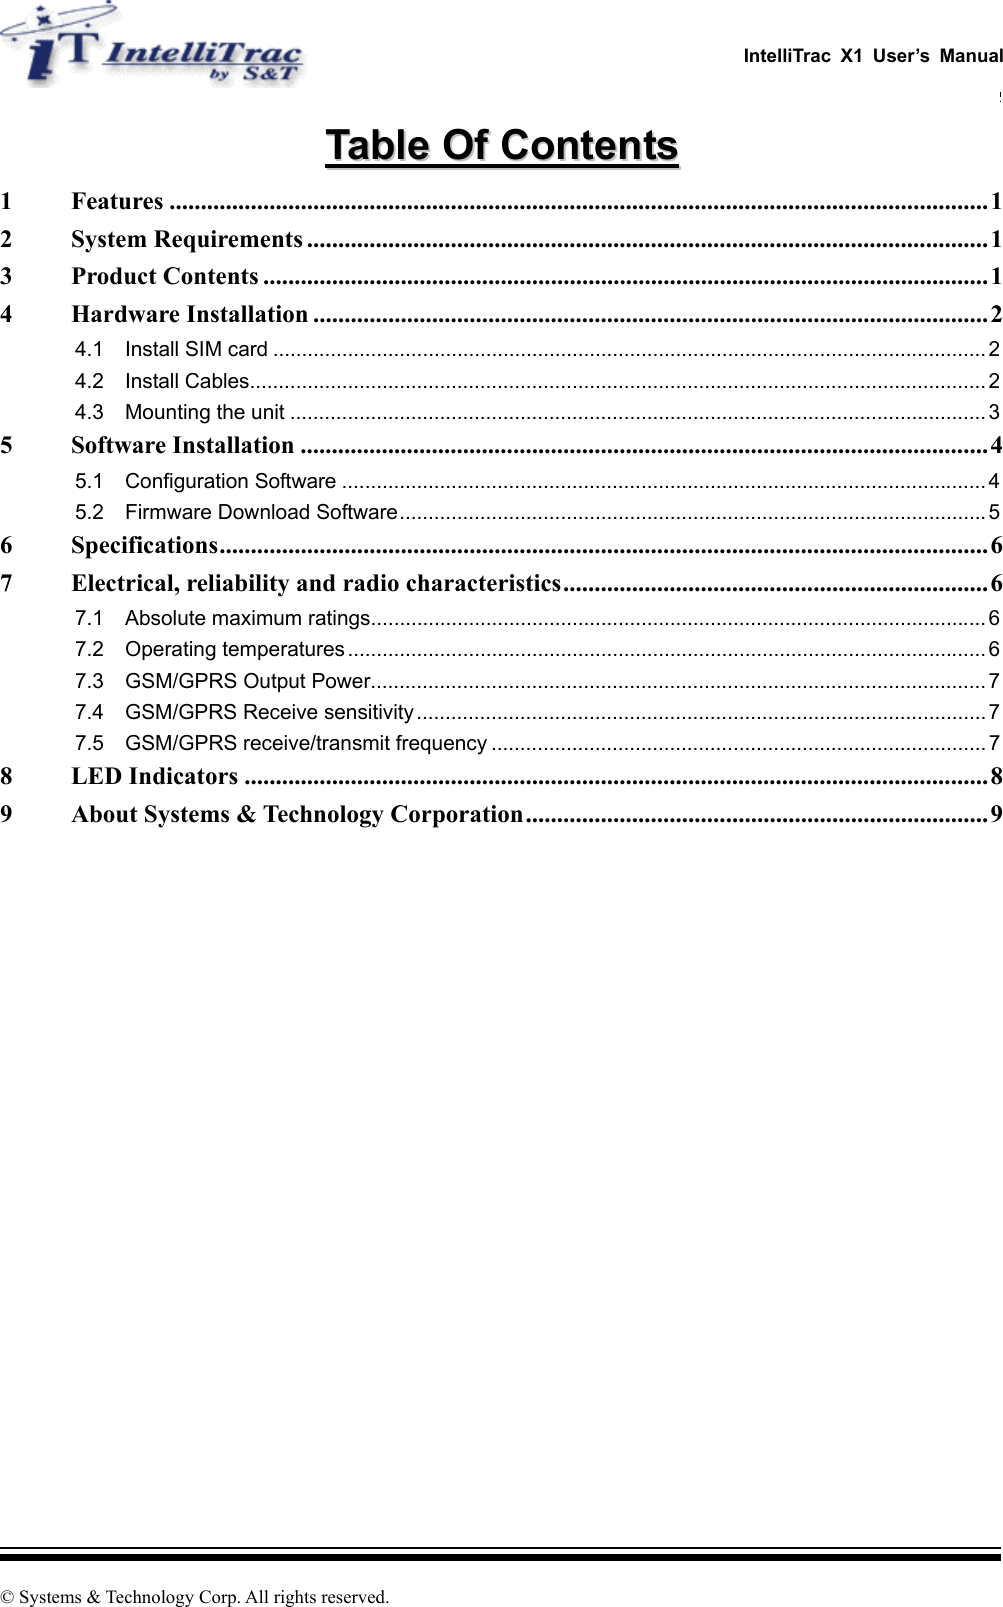  IntelliTrac X1 User’s Manual  Table Of Contents Table Of Contents 1 Features ...................................................................................................................................1 2 System Requirements .............................................................................................................1 3 Product Contents ....................................................................................................................1 4 Hardware Installation ............................................................................................................2 4.1 Install SIM card ............................................................................................................................ 2 4.2 Install Cables................................................................................................................................ 2 4.3 Mounting the unit ......................................................................................................................... 3 5 Software Installation ..............................................................................................................4 5.1 Configuration Software ................................................................................................................ 4 5.2 Firmware Download Software......................................................................................................5 6 Specifications...........................................................................................................................6 7 Electrical, reliability and radio characteristics....................................................................6 7.1 Absolute maximum ratings........................................................................................................... 6 7.2 Operating temperatures ............................................................................................................... 6 7.3 GSM/GPRS Output Power...........................................................................................................7 7.4 GSM/GPRS Receive sensitivity ...................................................................................................7 7.5 GSM/GPRS receive/transmit frequency ...................................................................................... 7 8 LED Indicators .......................................................................................................................8 9 About Systems &amp; Technology Corporation..........................................................................9  © Systems &amp; Technology Corp. All rights reserved. 